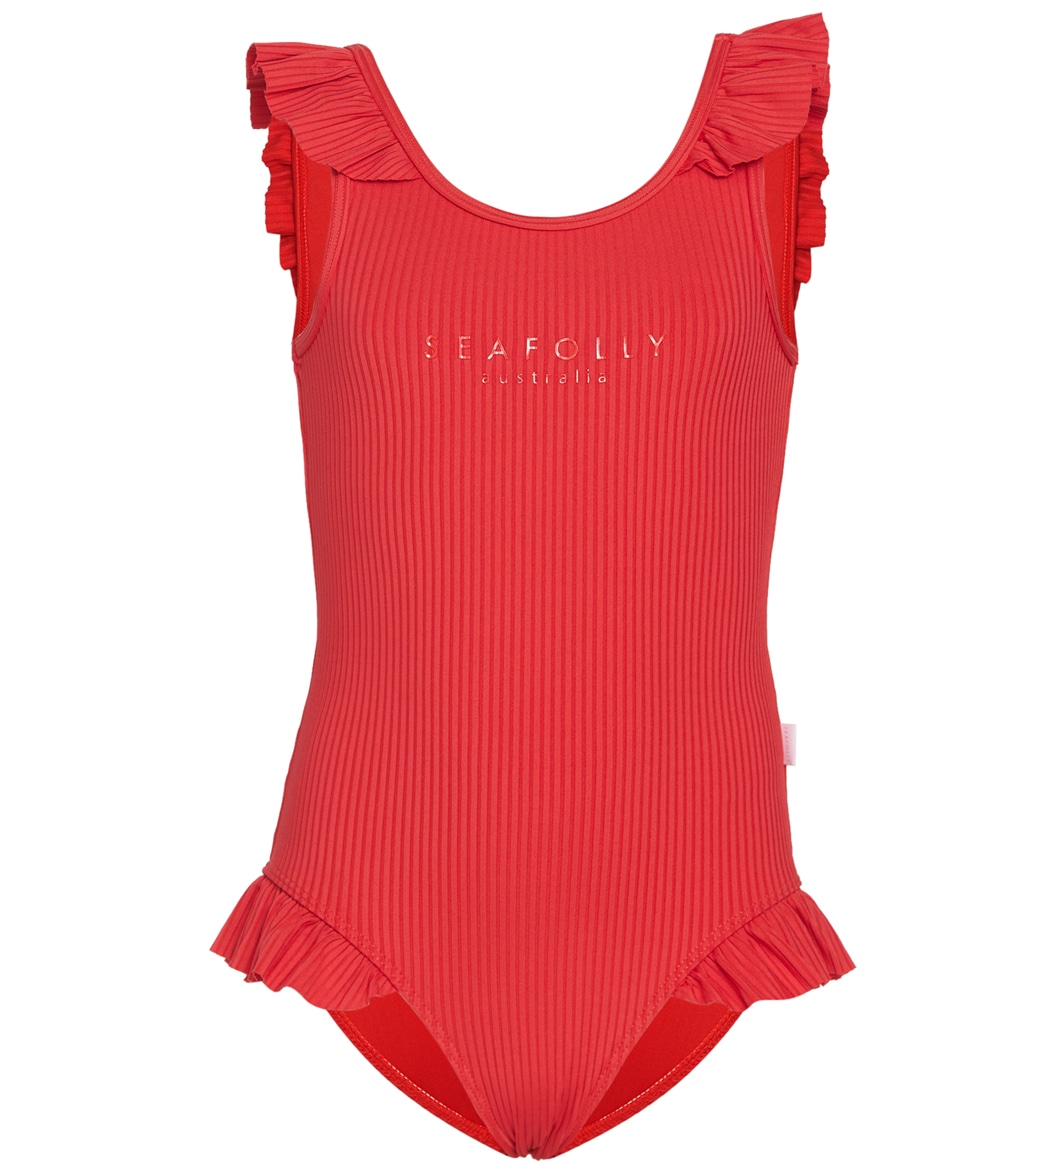 Seafolly Girls' Summer Essentials Ruffle One Piece Swimsuit Baby Toddler - Chilli Red 1 - Swimoutlet.com